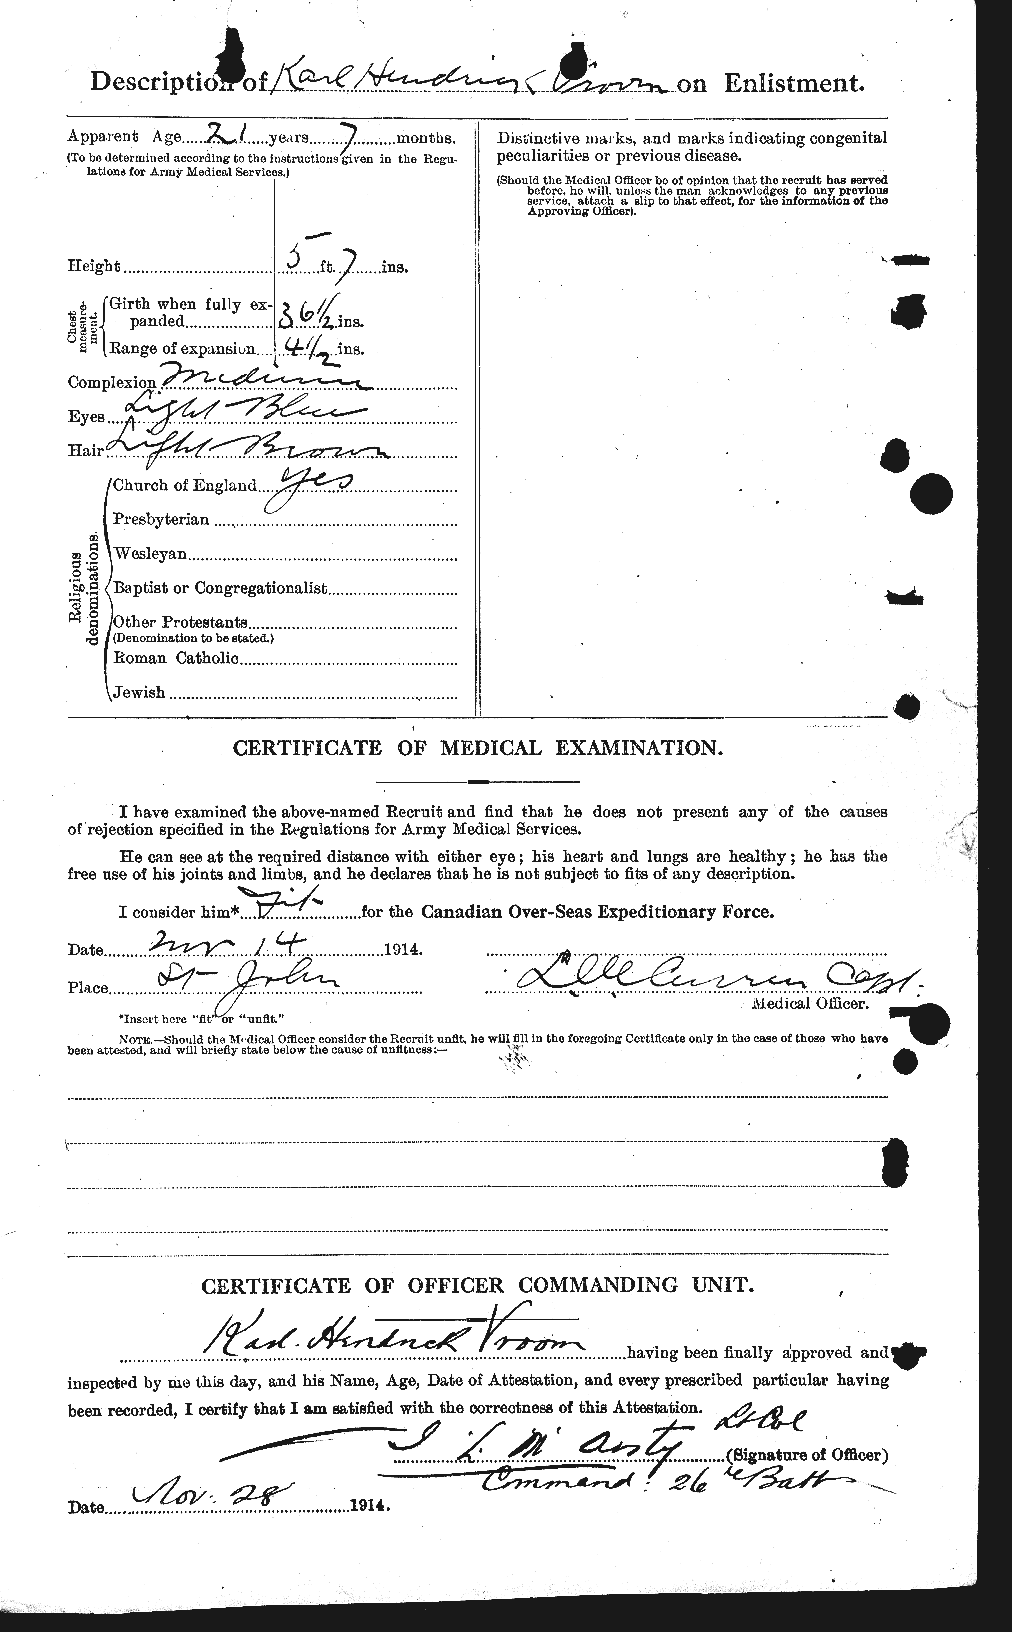 Personnel Records of the First World War - CEF 652527b